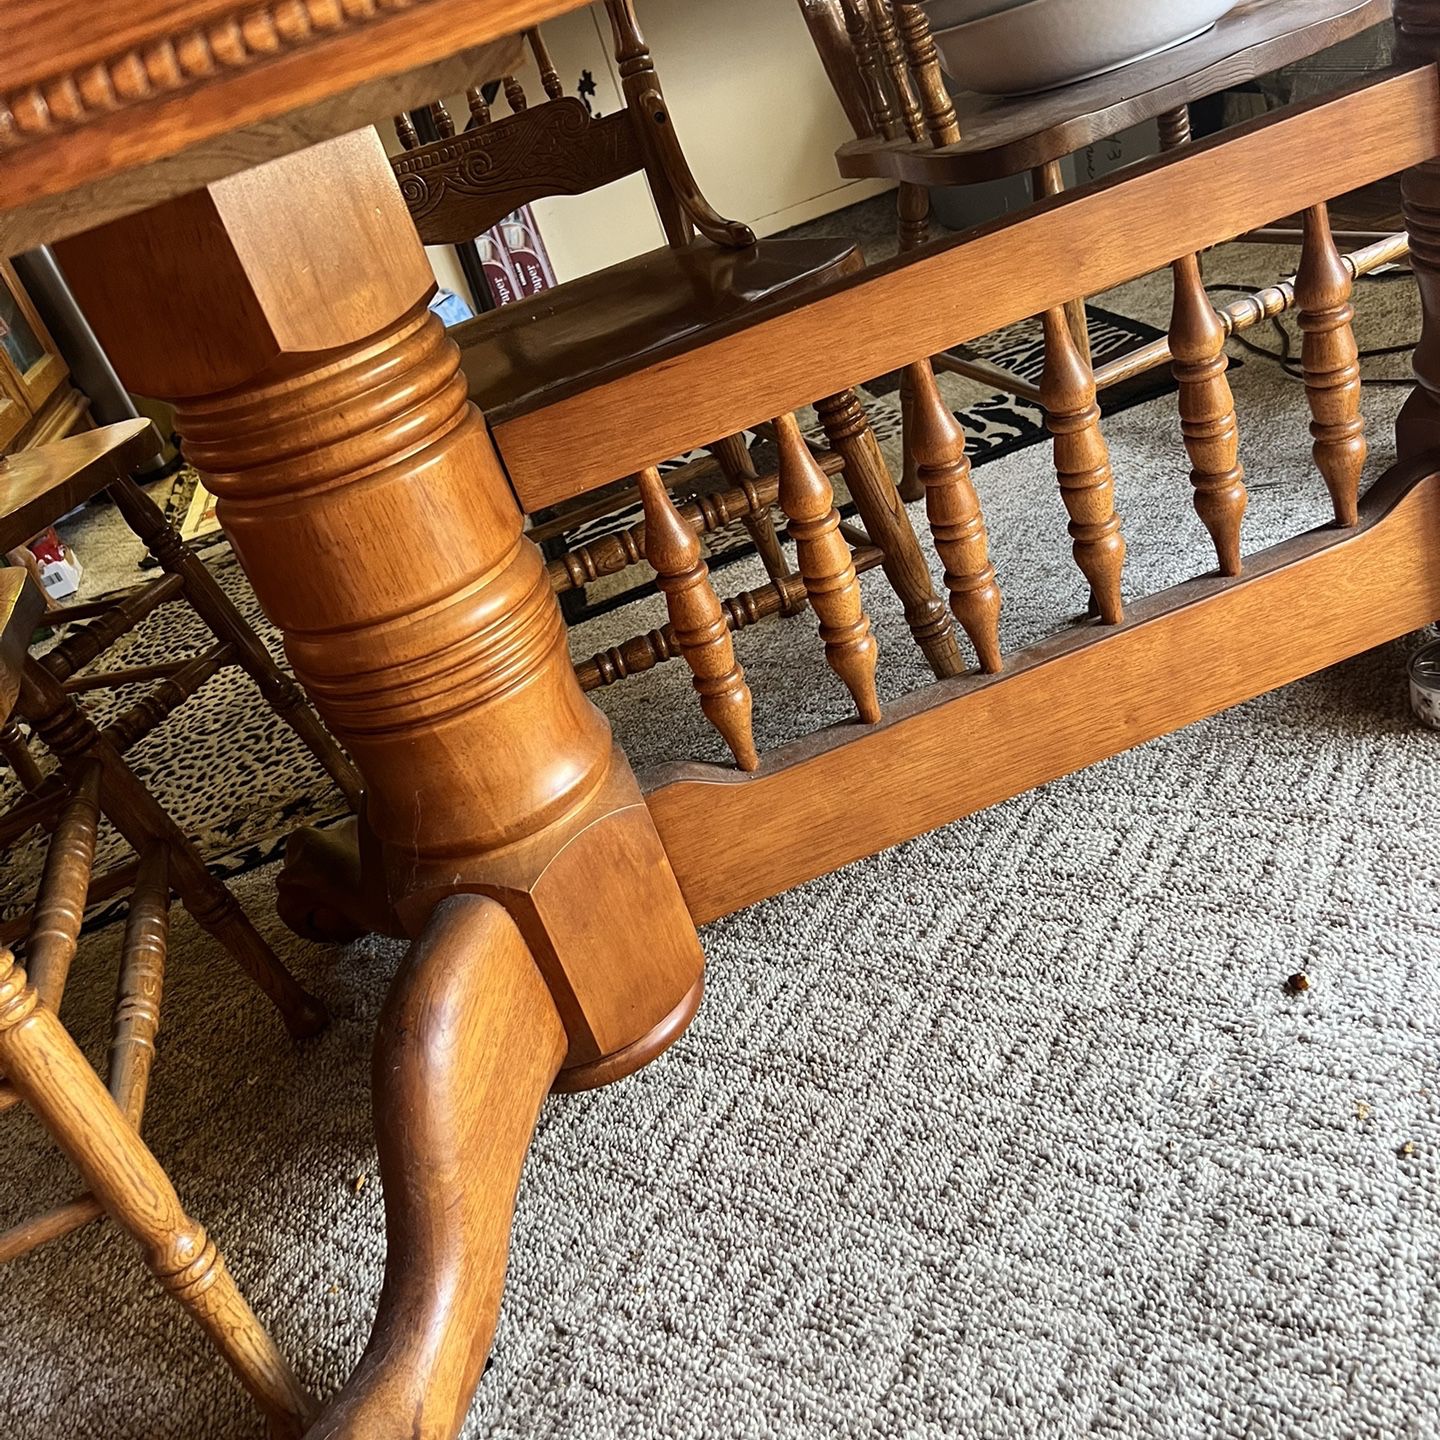 Vintage Table And Chairs Full Set/will Negotiate 